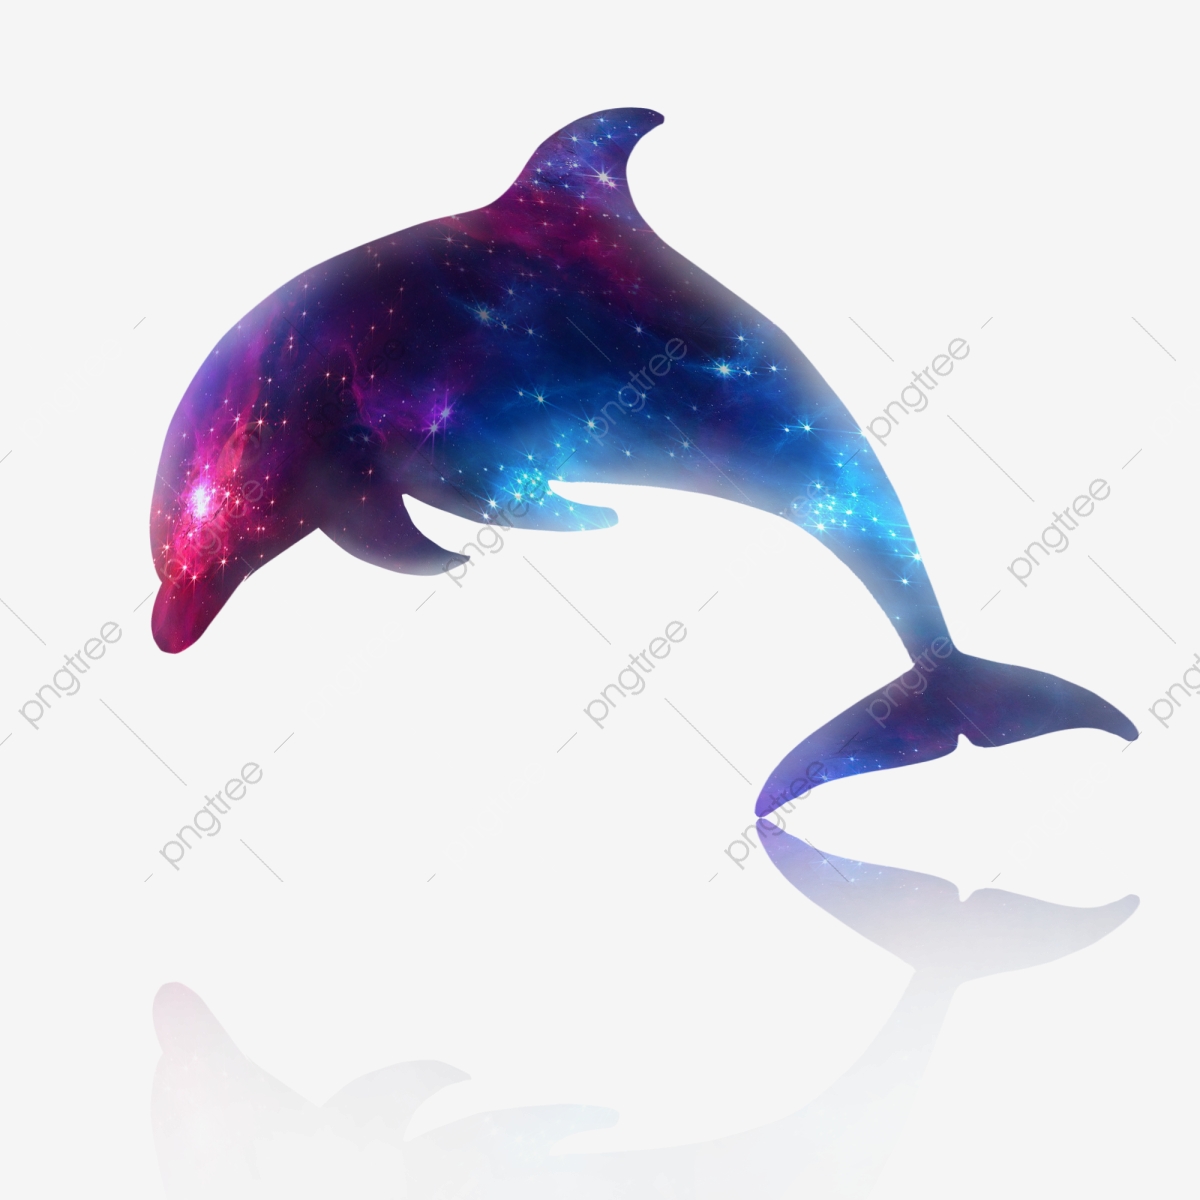 Dolphins clipart colorful. Starry available for commercial